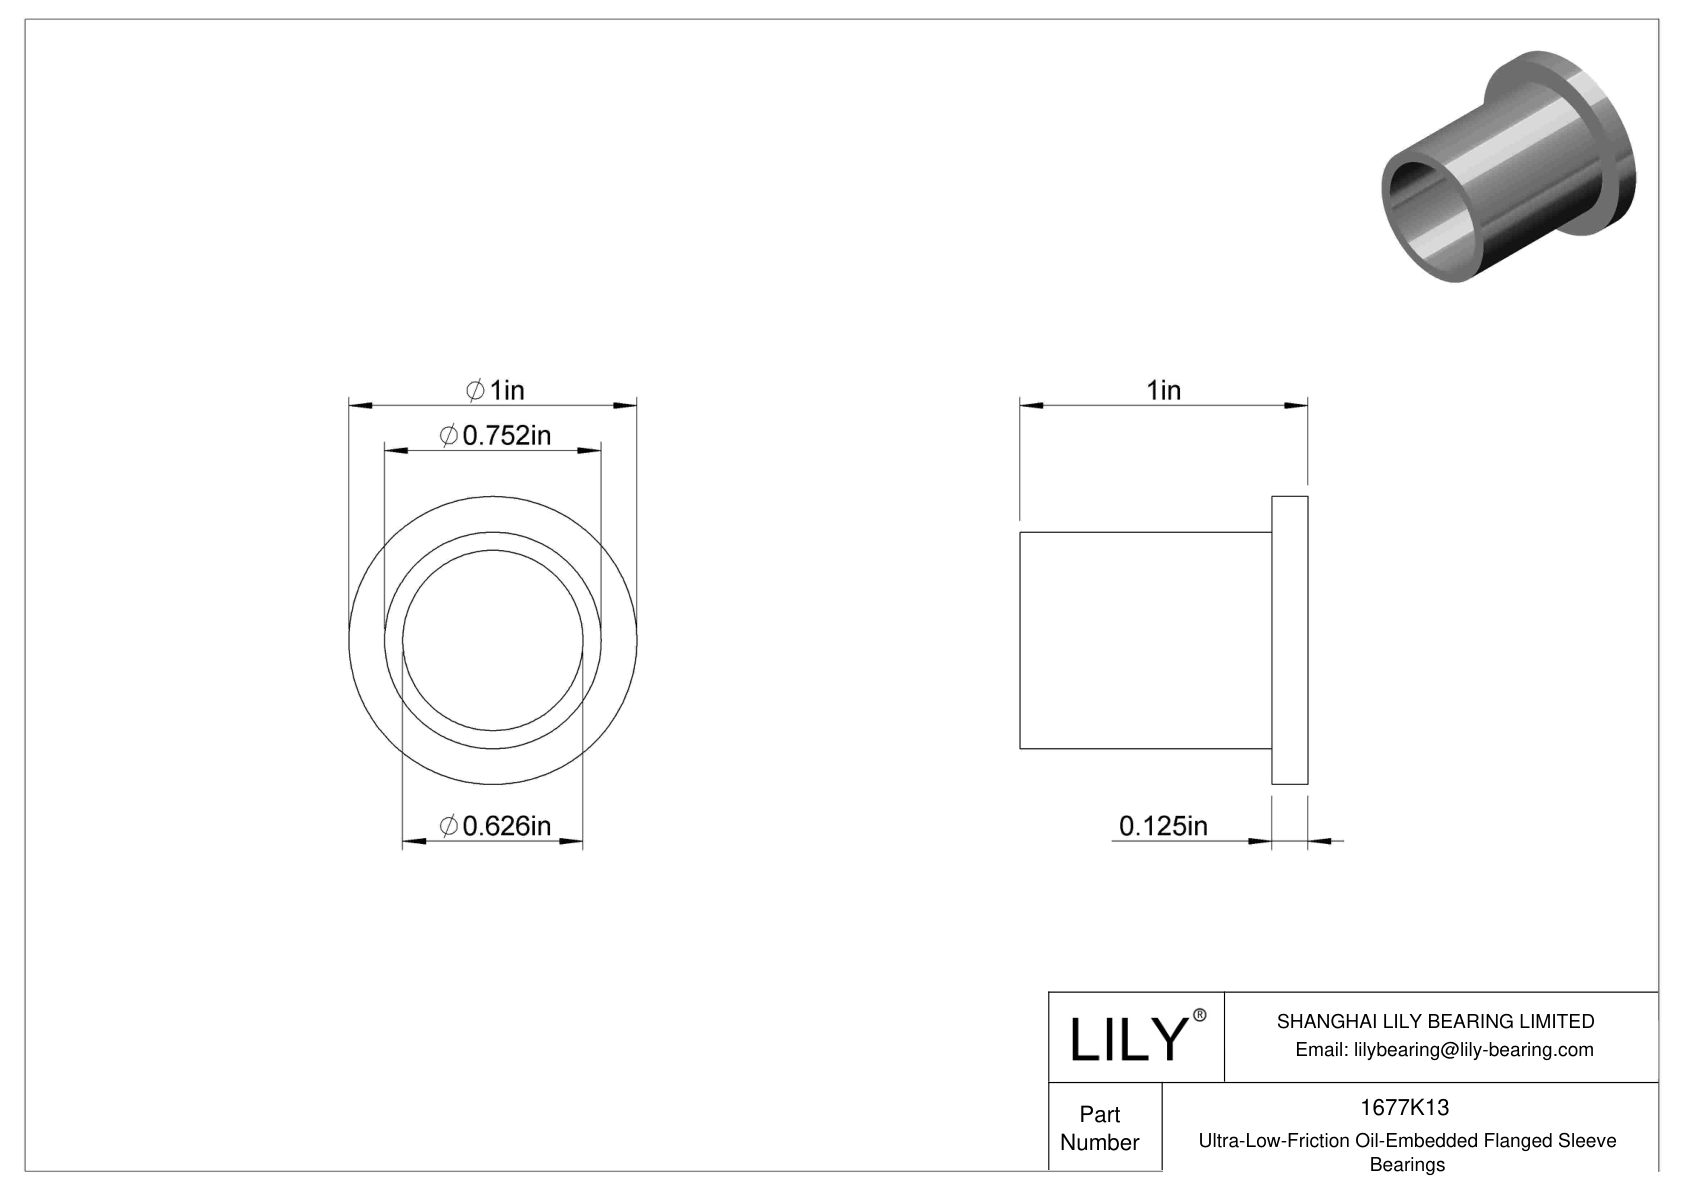 BGHHKBD Ultra-Low-Friction Oil-Embedded Flanged Sleeve Bearings cad drawing